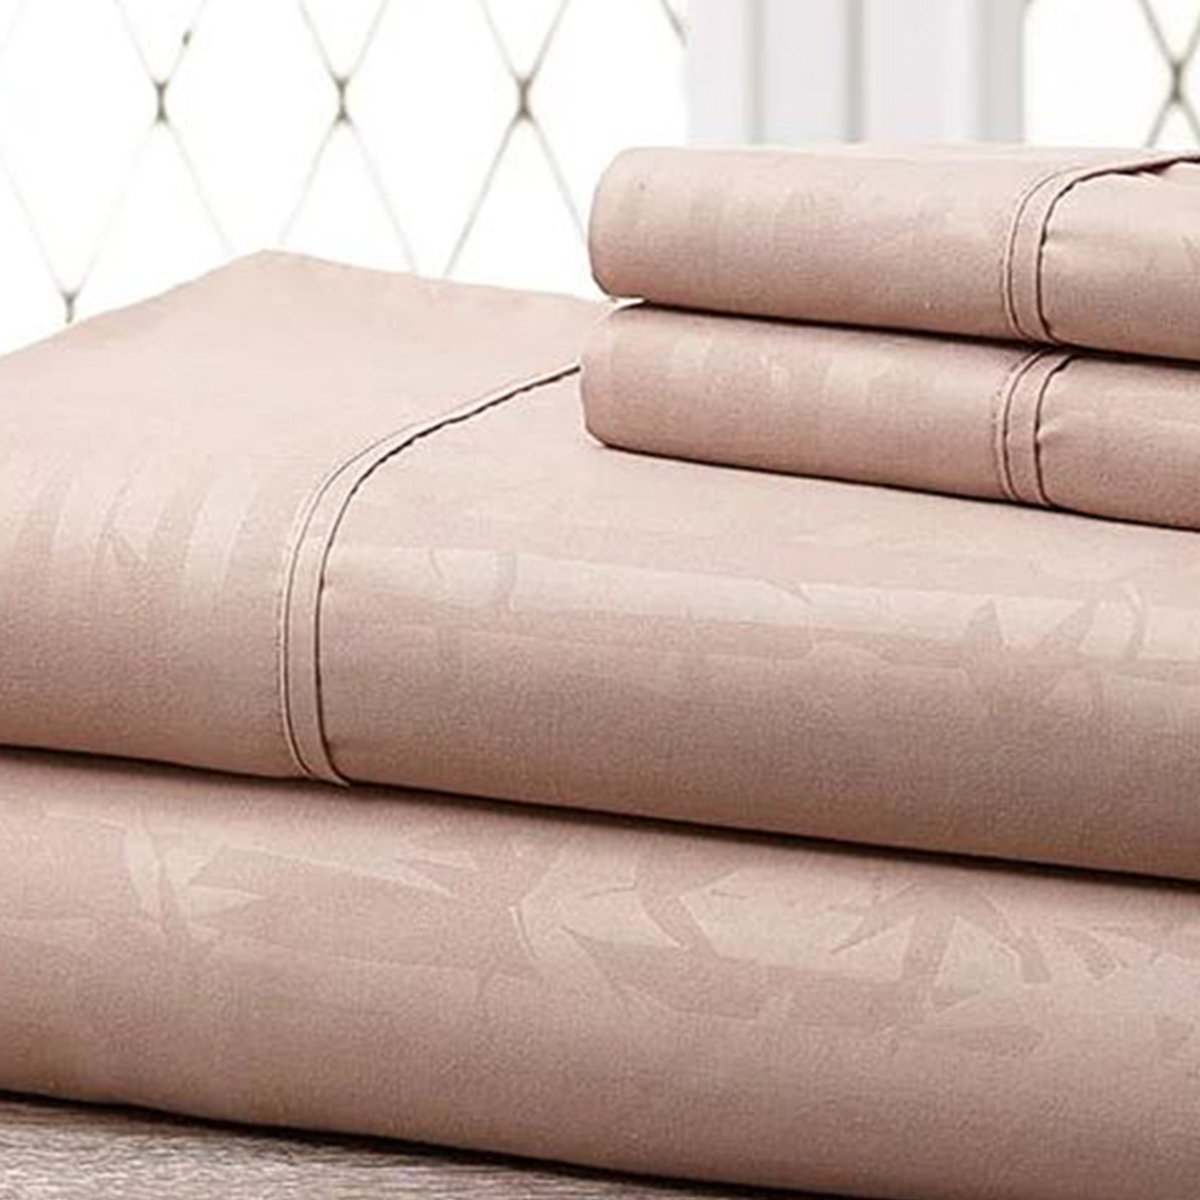 Super-soft 1600 Series Bamboo Embossed Bed Sheet, Champagne - Full, 4 Piece